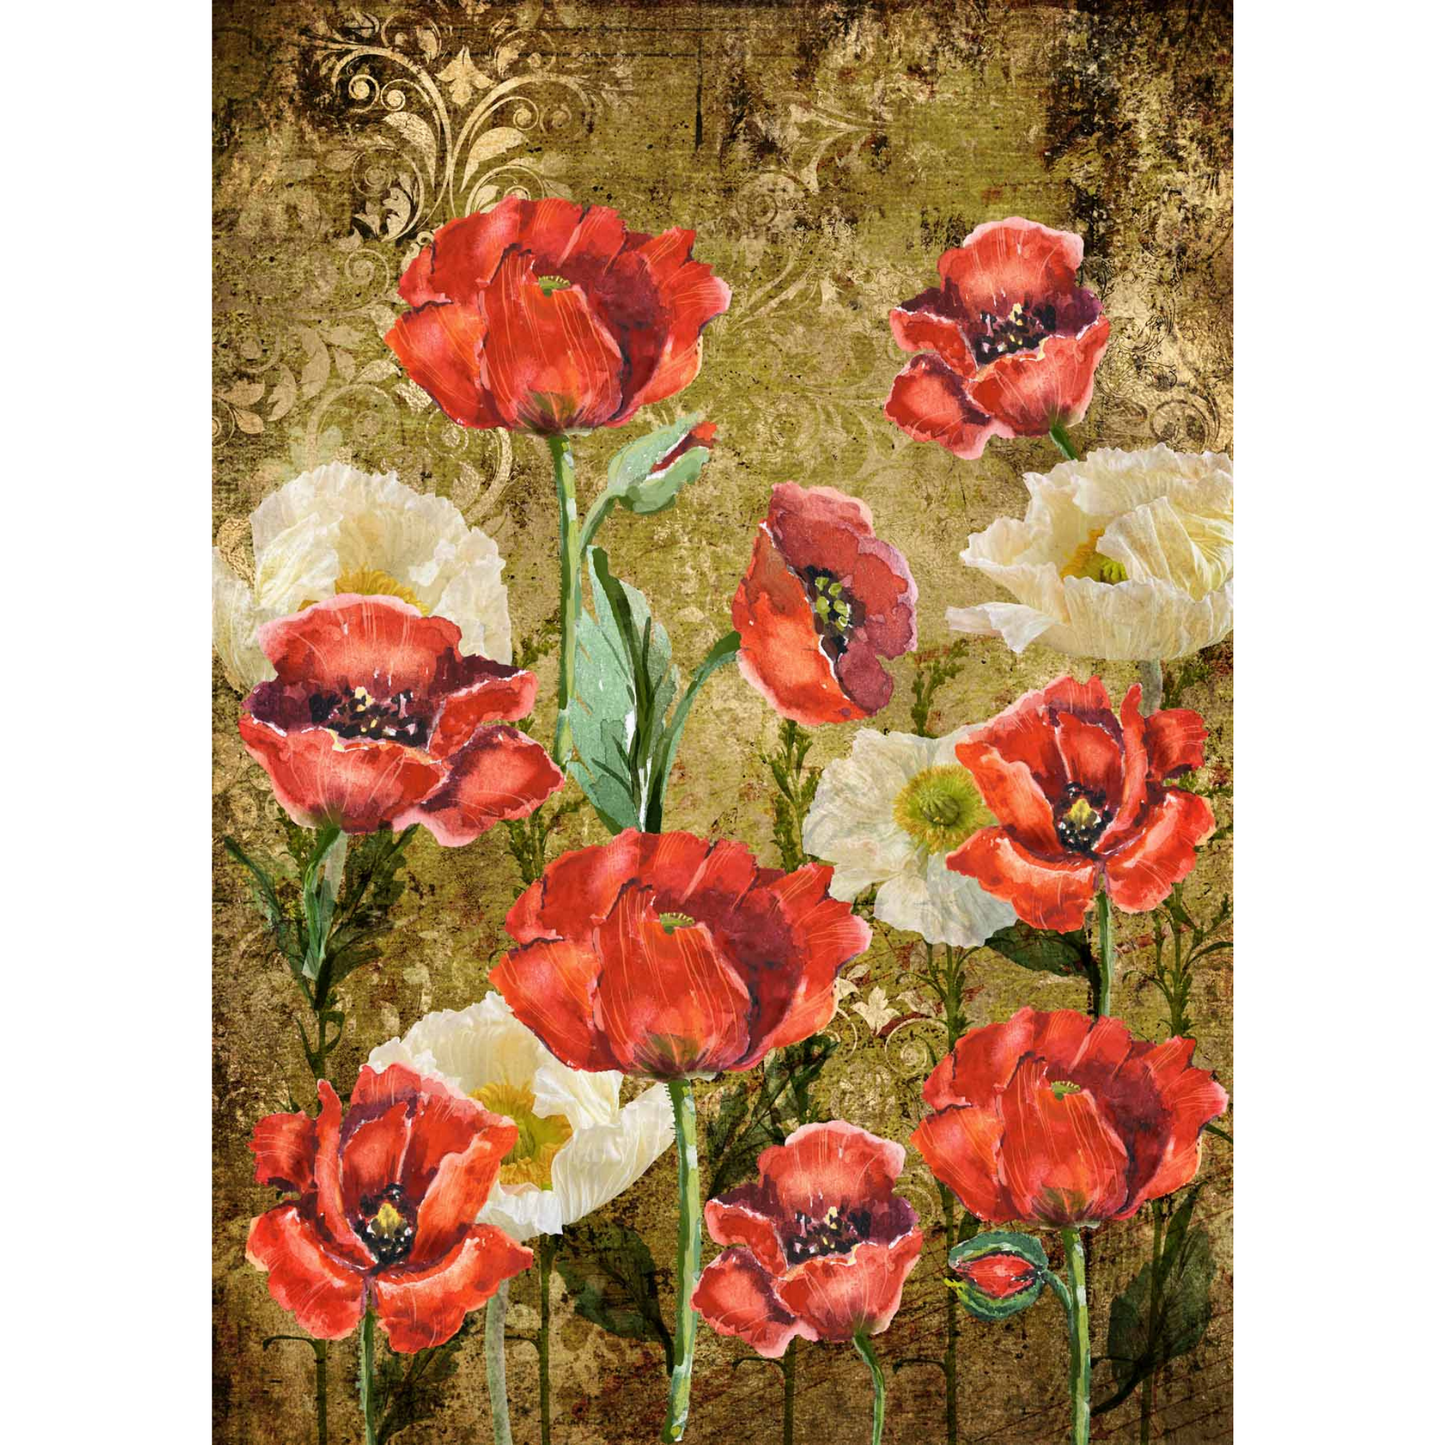 Poppies- Decoupage Rice Paper by Decoupage Queen. Size a#-11.7" x 16.5" available at Milton's Daughter.